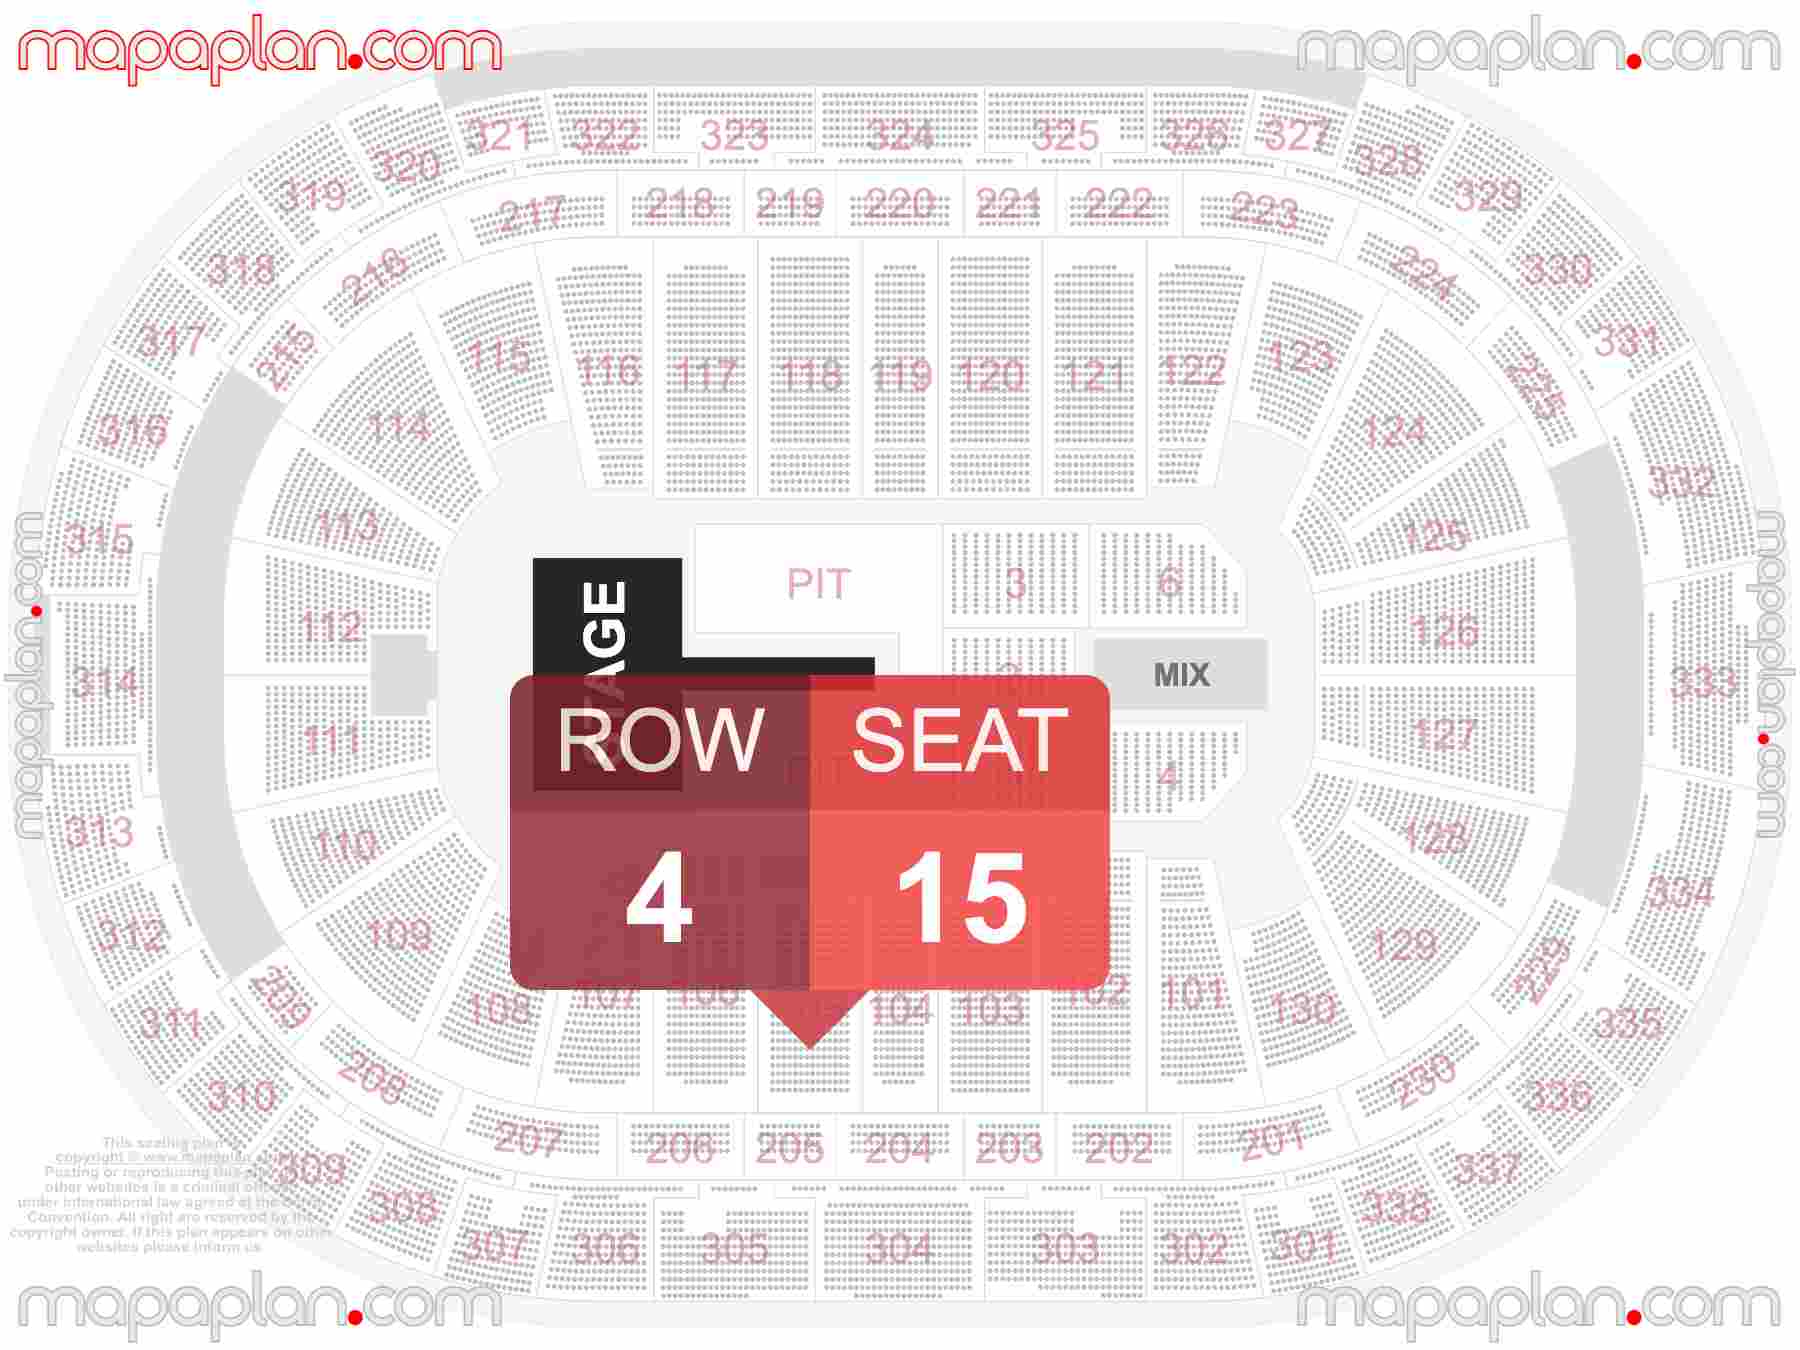 Raleigh PNC Arena seating chart Concert with PIT floor standing interactive seating checker map plan showing seat numbers per row - Ticket prices sections review diagram